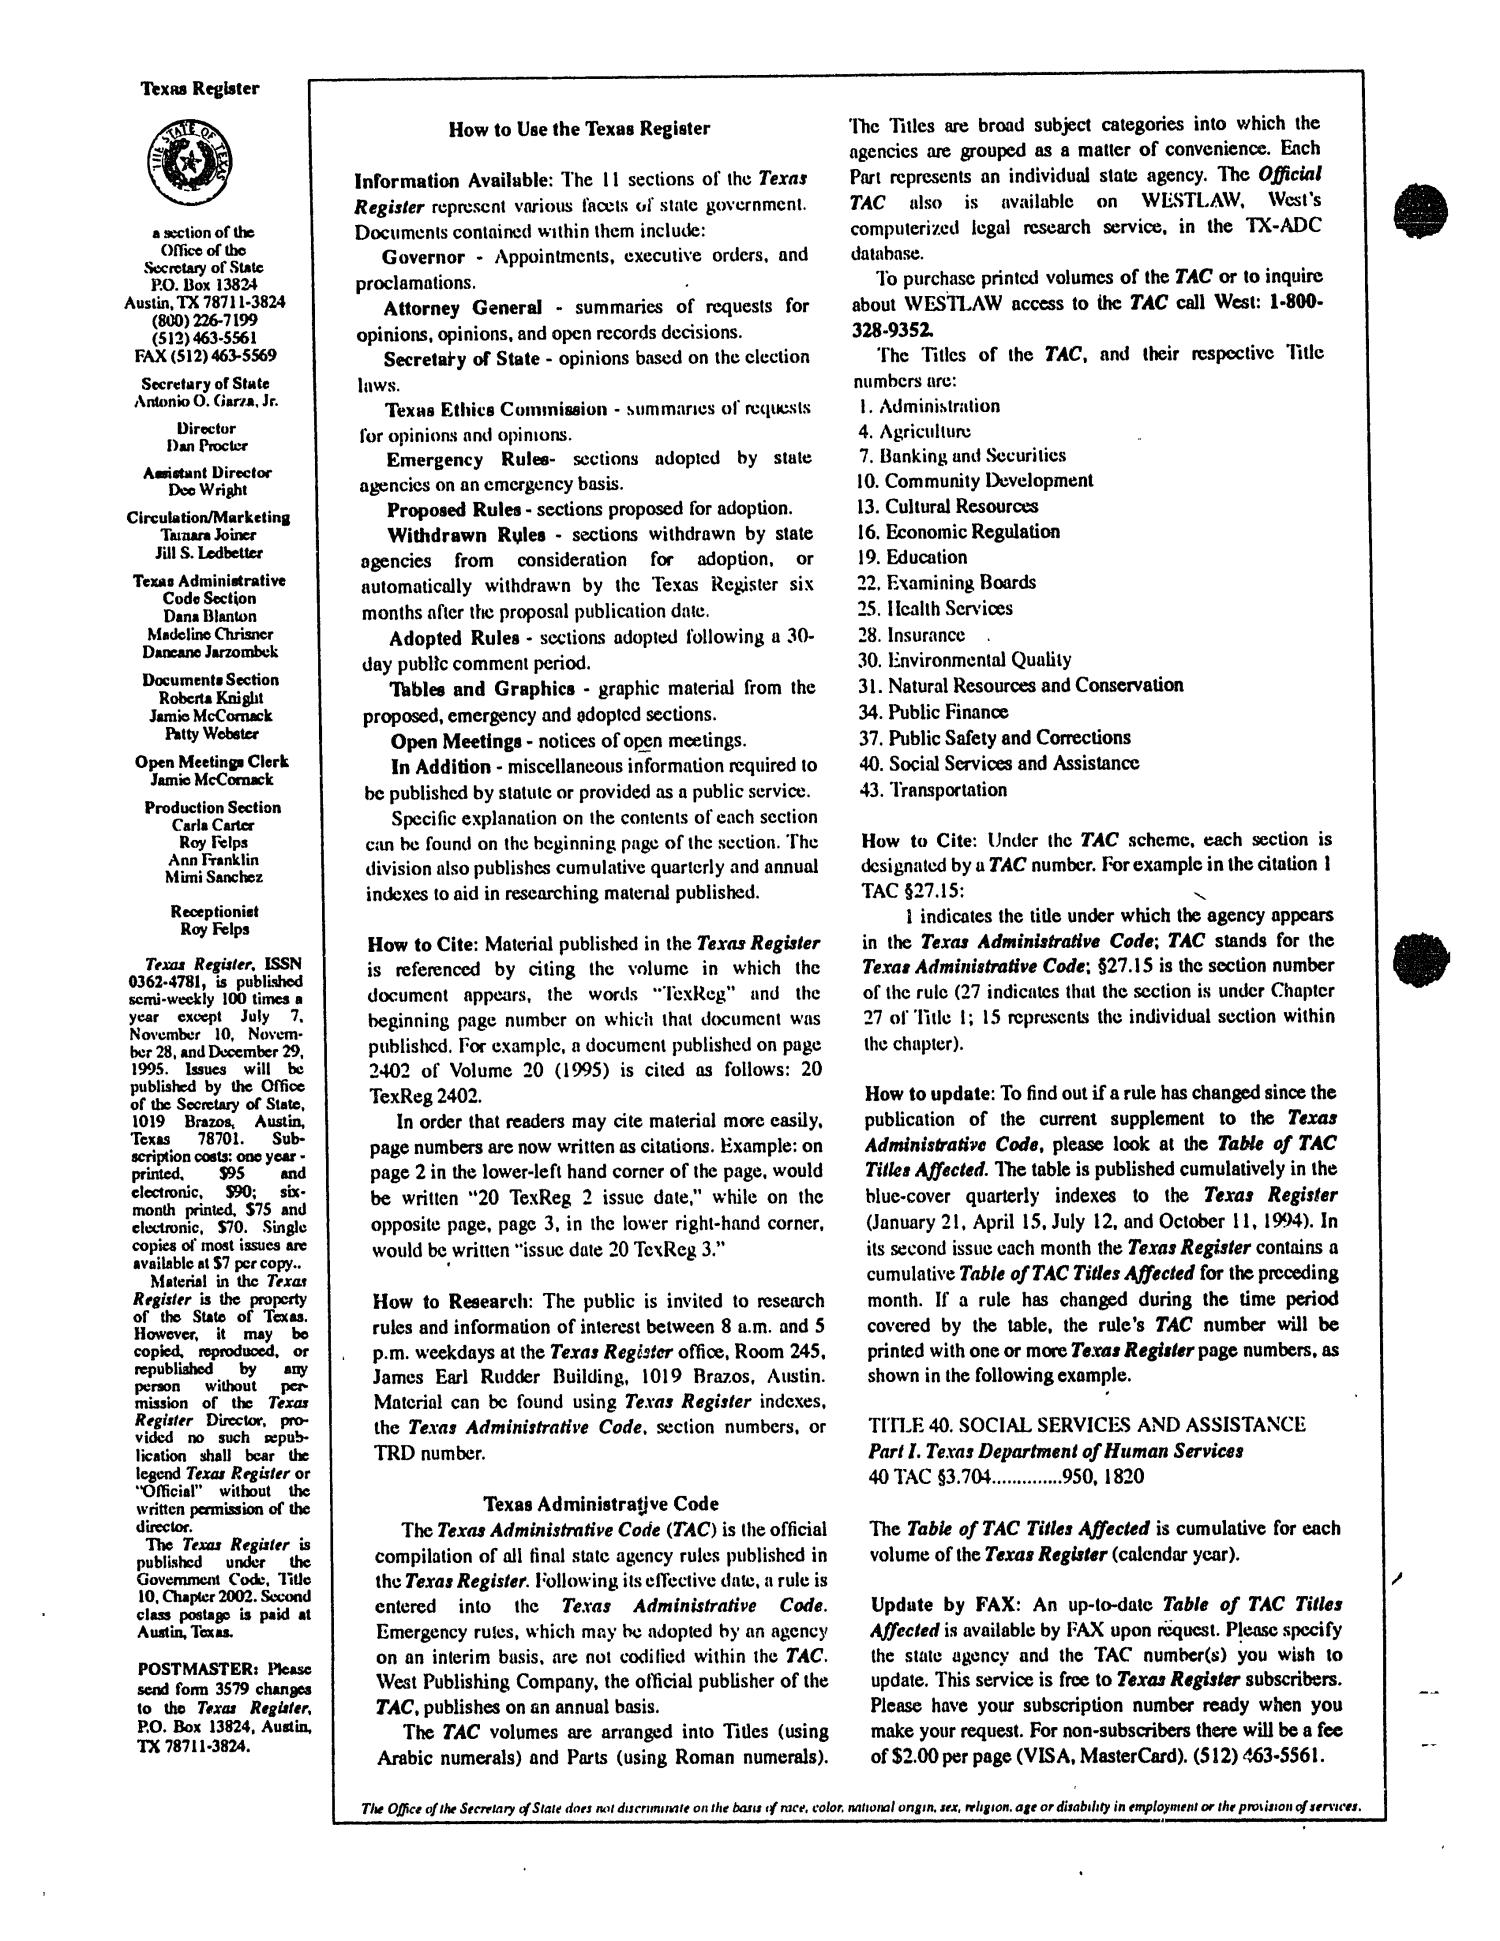 Texas Register, Volume 20, Number 88, Part III, Pages 10015-10162, November 24, 1995
                                                
                                                    None
                                                